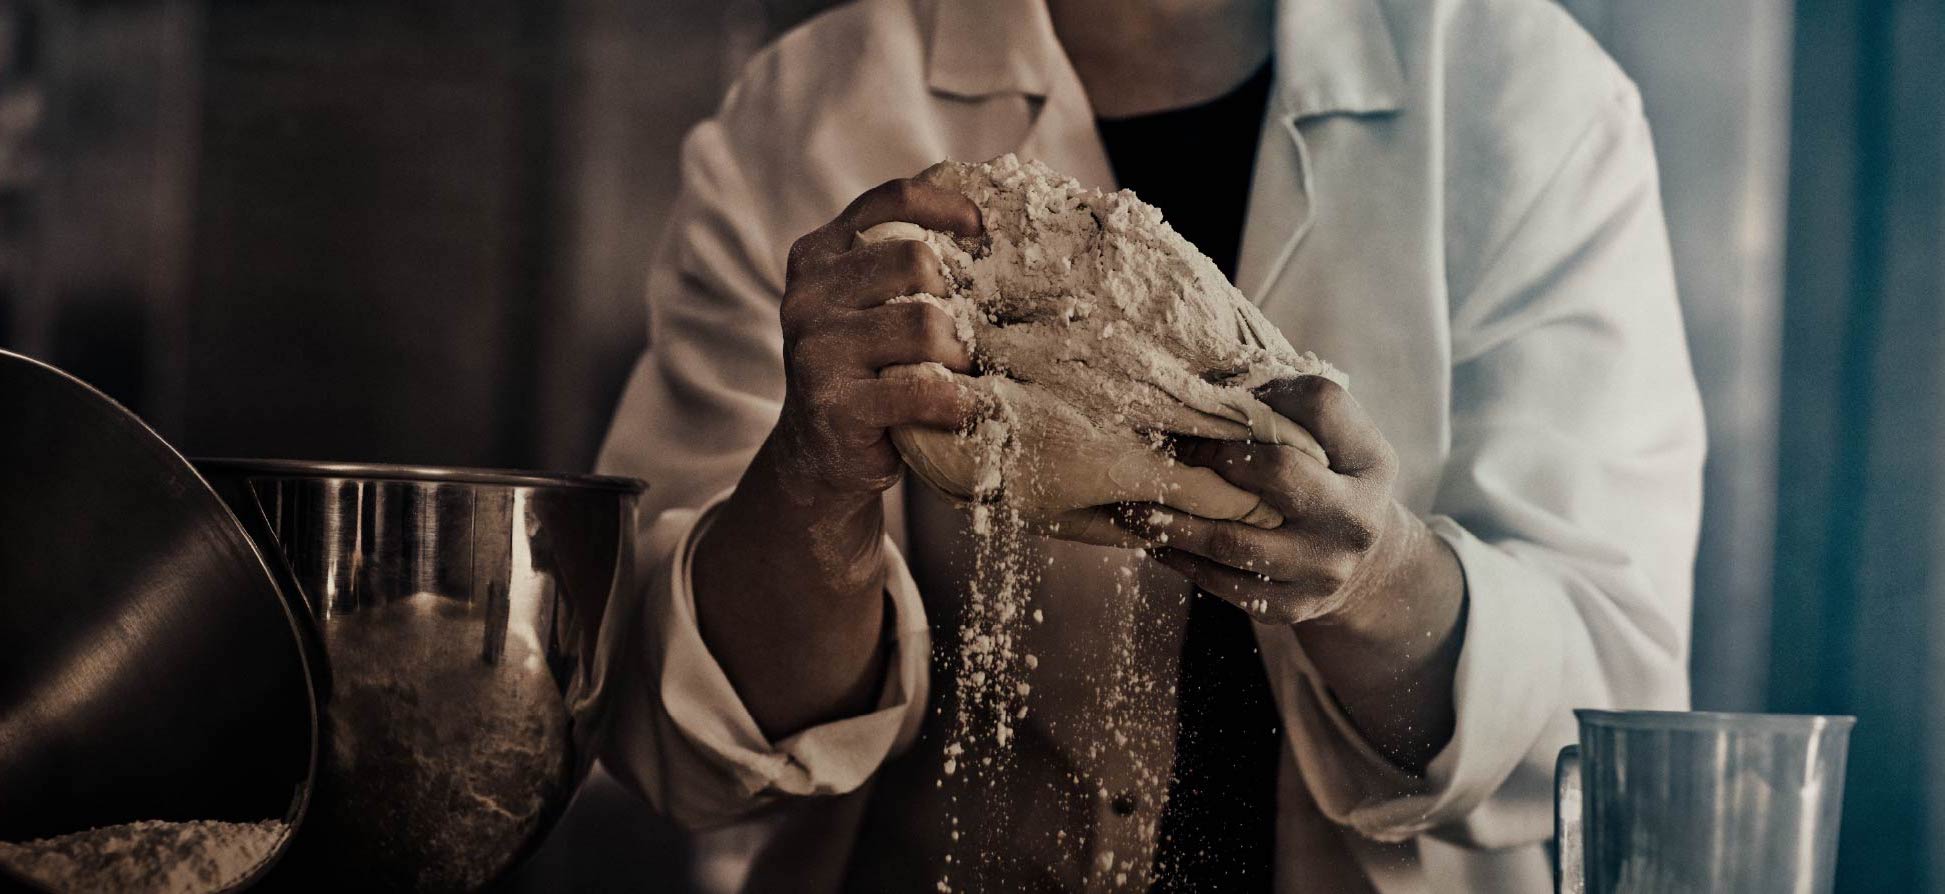 A food scientist kneads dough covered in flour